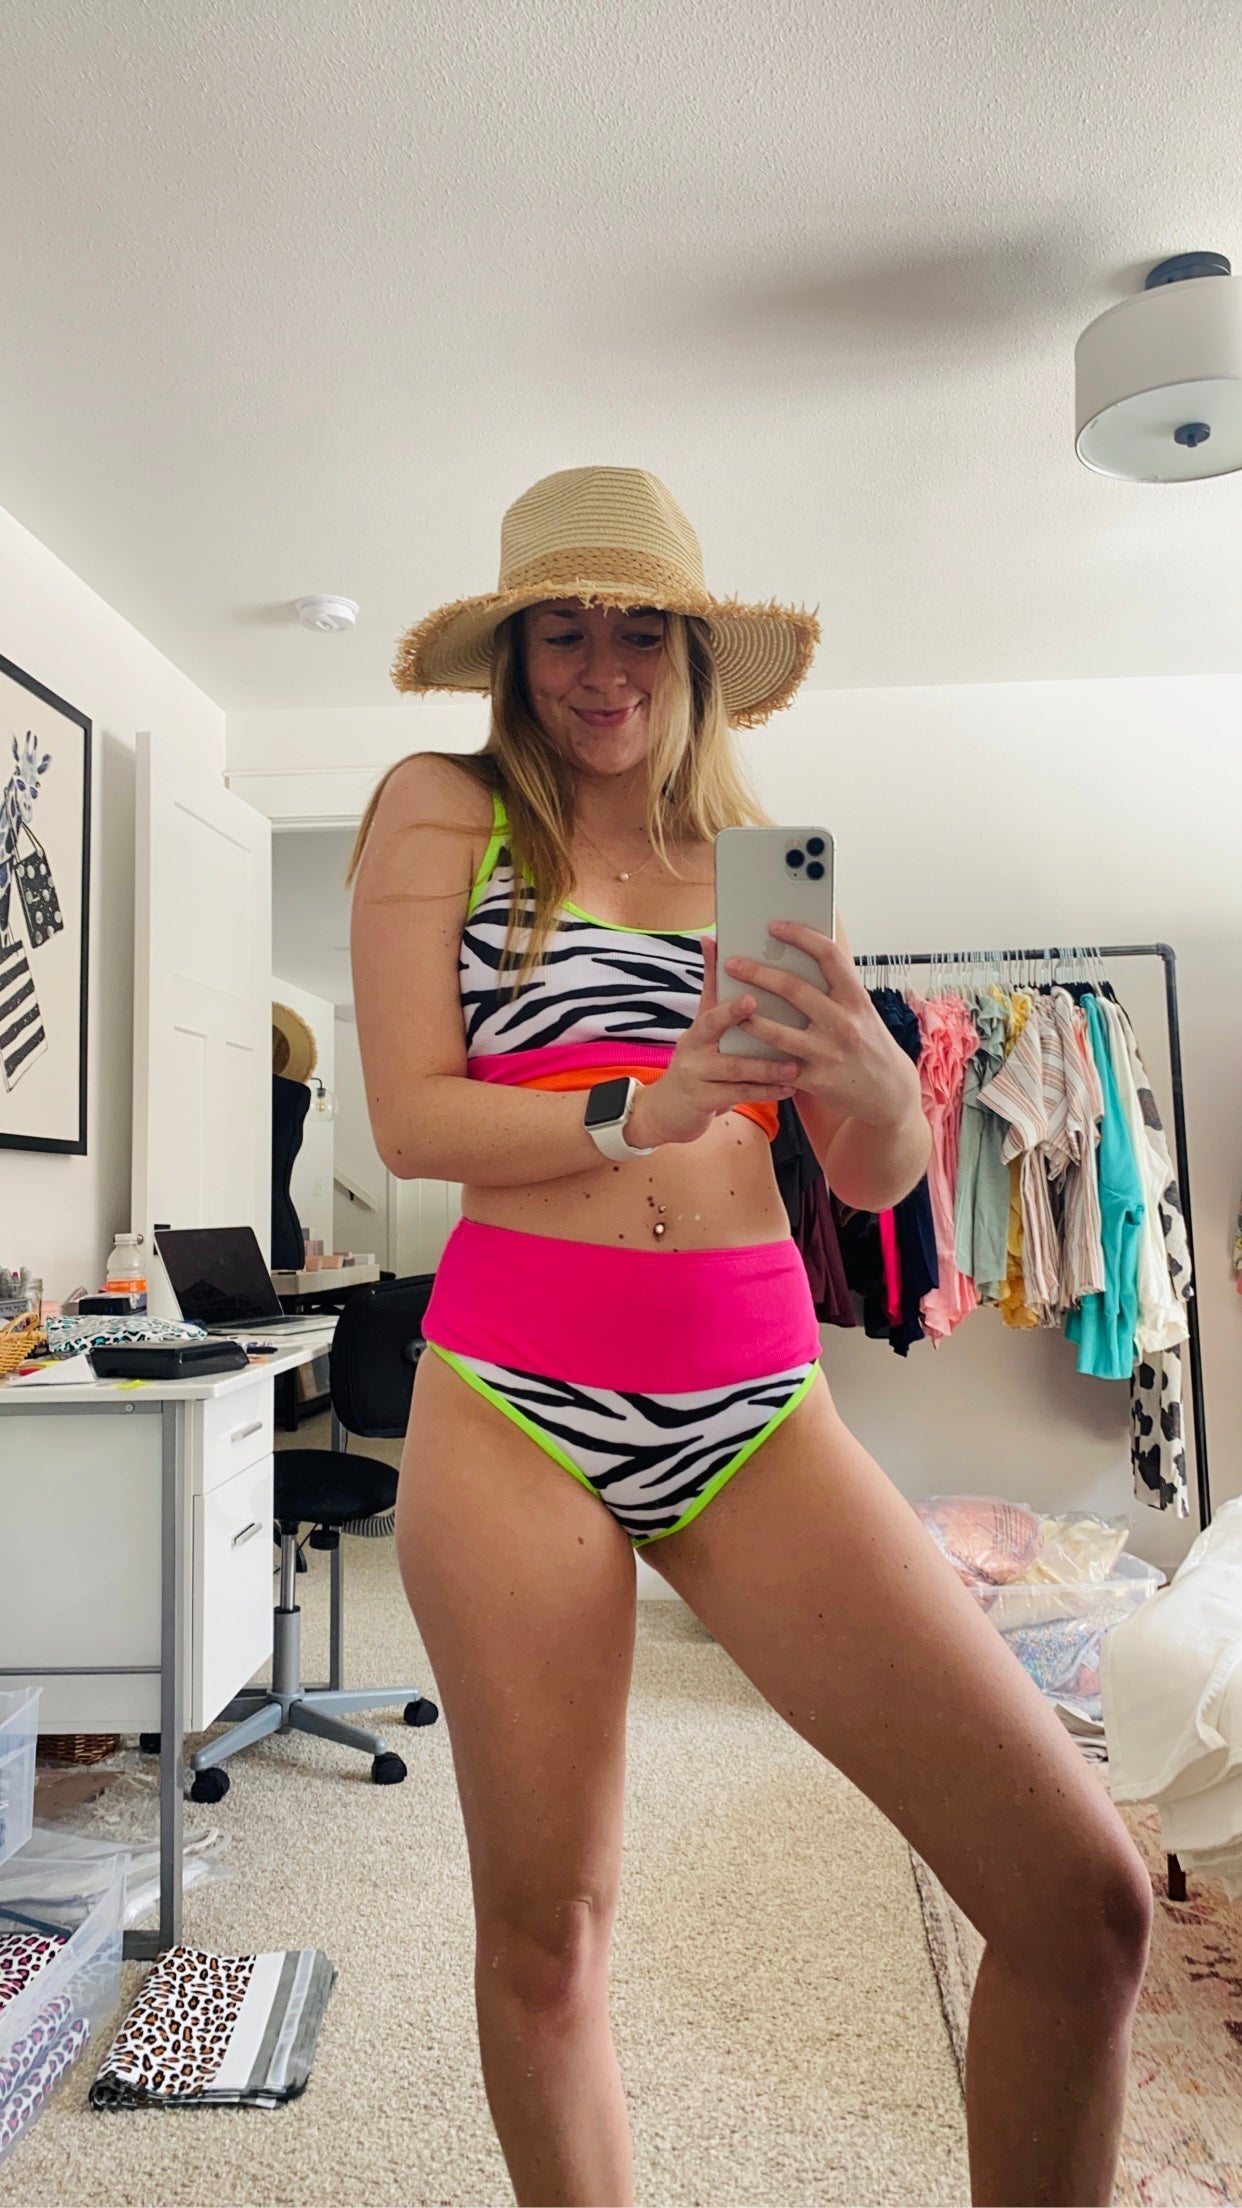 Spend your summer strutting on the wild side with this fun two piece swimsuit featuring stretchy material patterned with a black and white zebra print with neon bands, adjustable spaghetti straps, and removable padding!